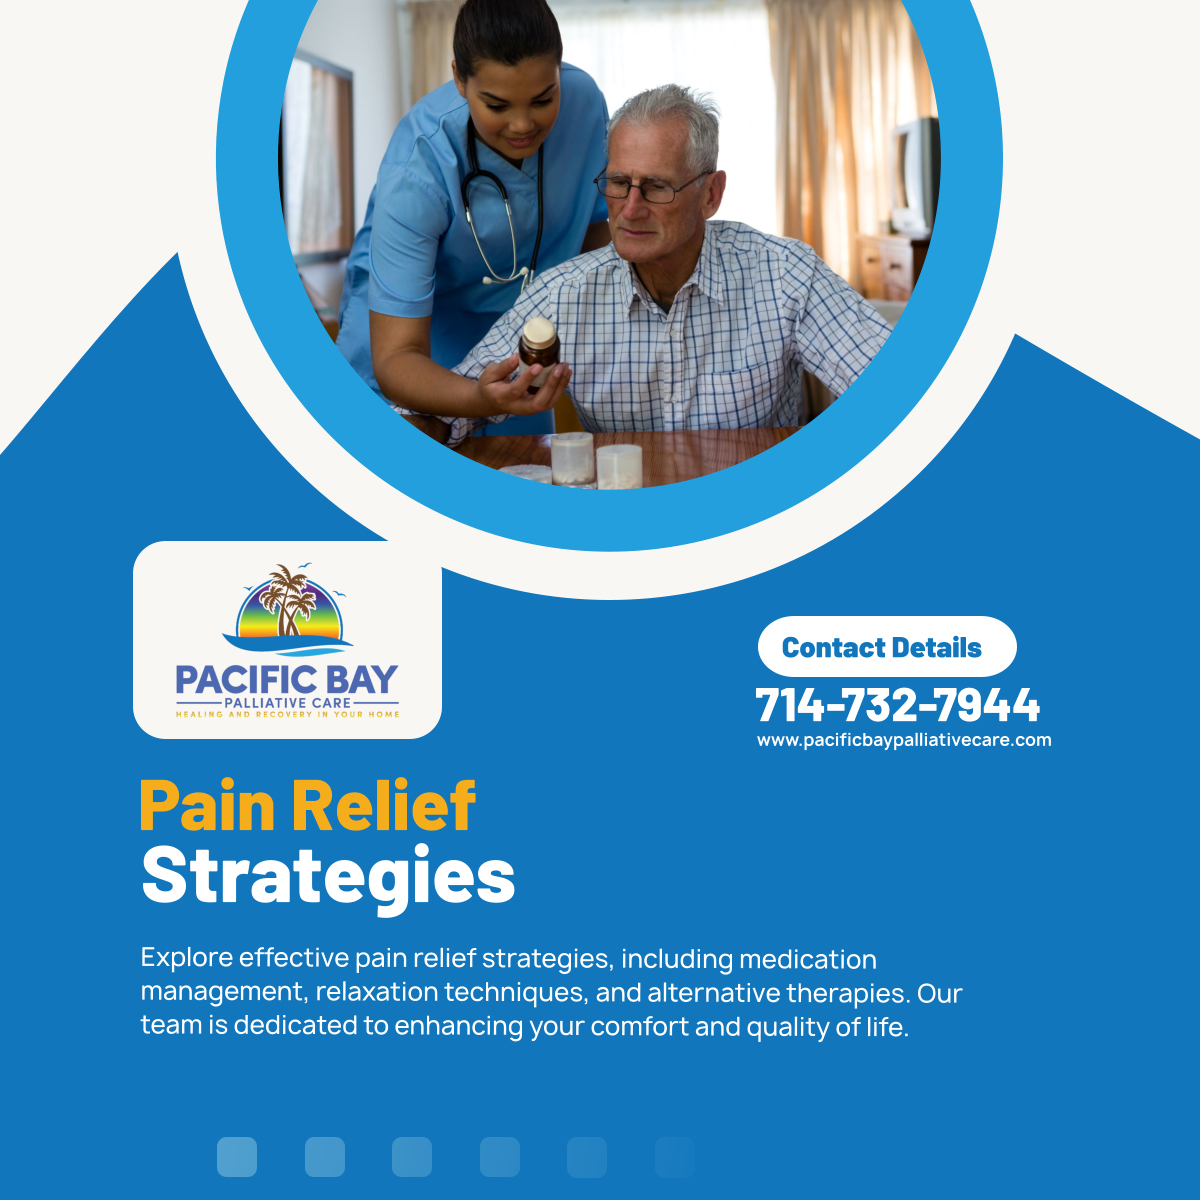 Experience effective pain relief with personalized strategies tailored to your needs. Discover medication management, relaxation techniques, and more. 

#BellflowerCalifornia #PalliativeCare #PainRelief